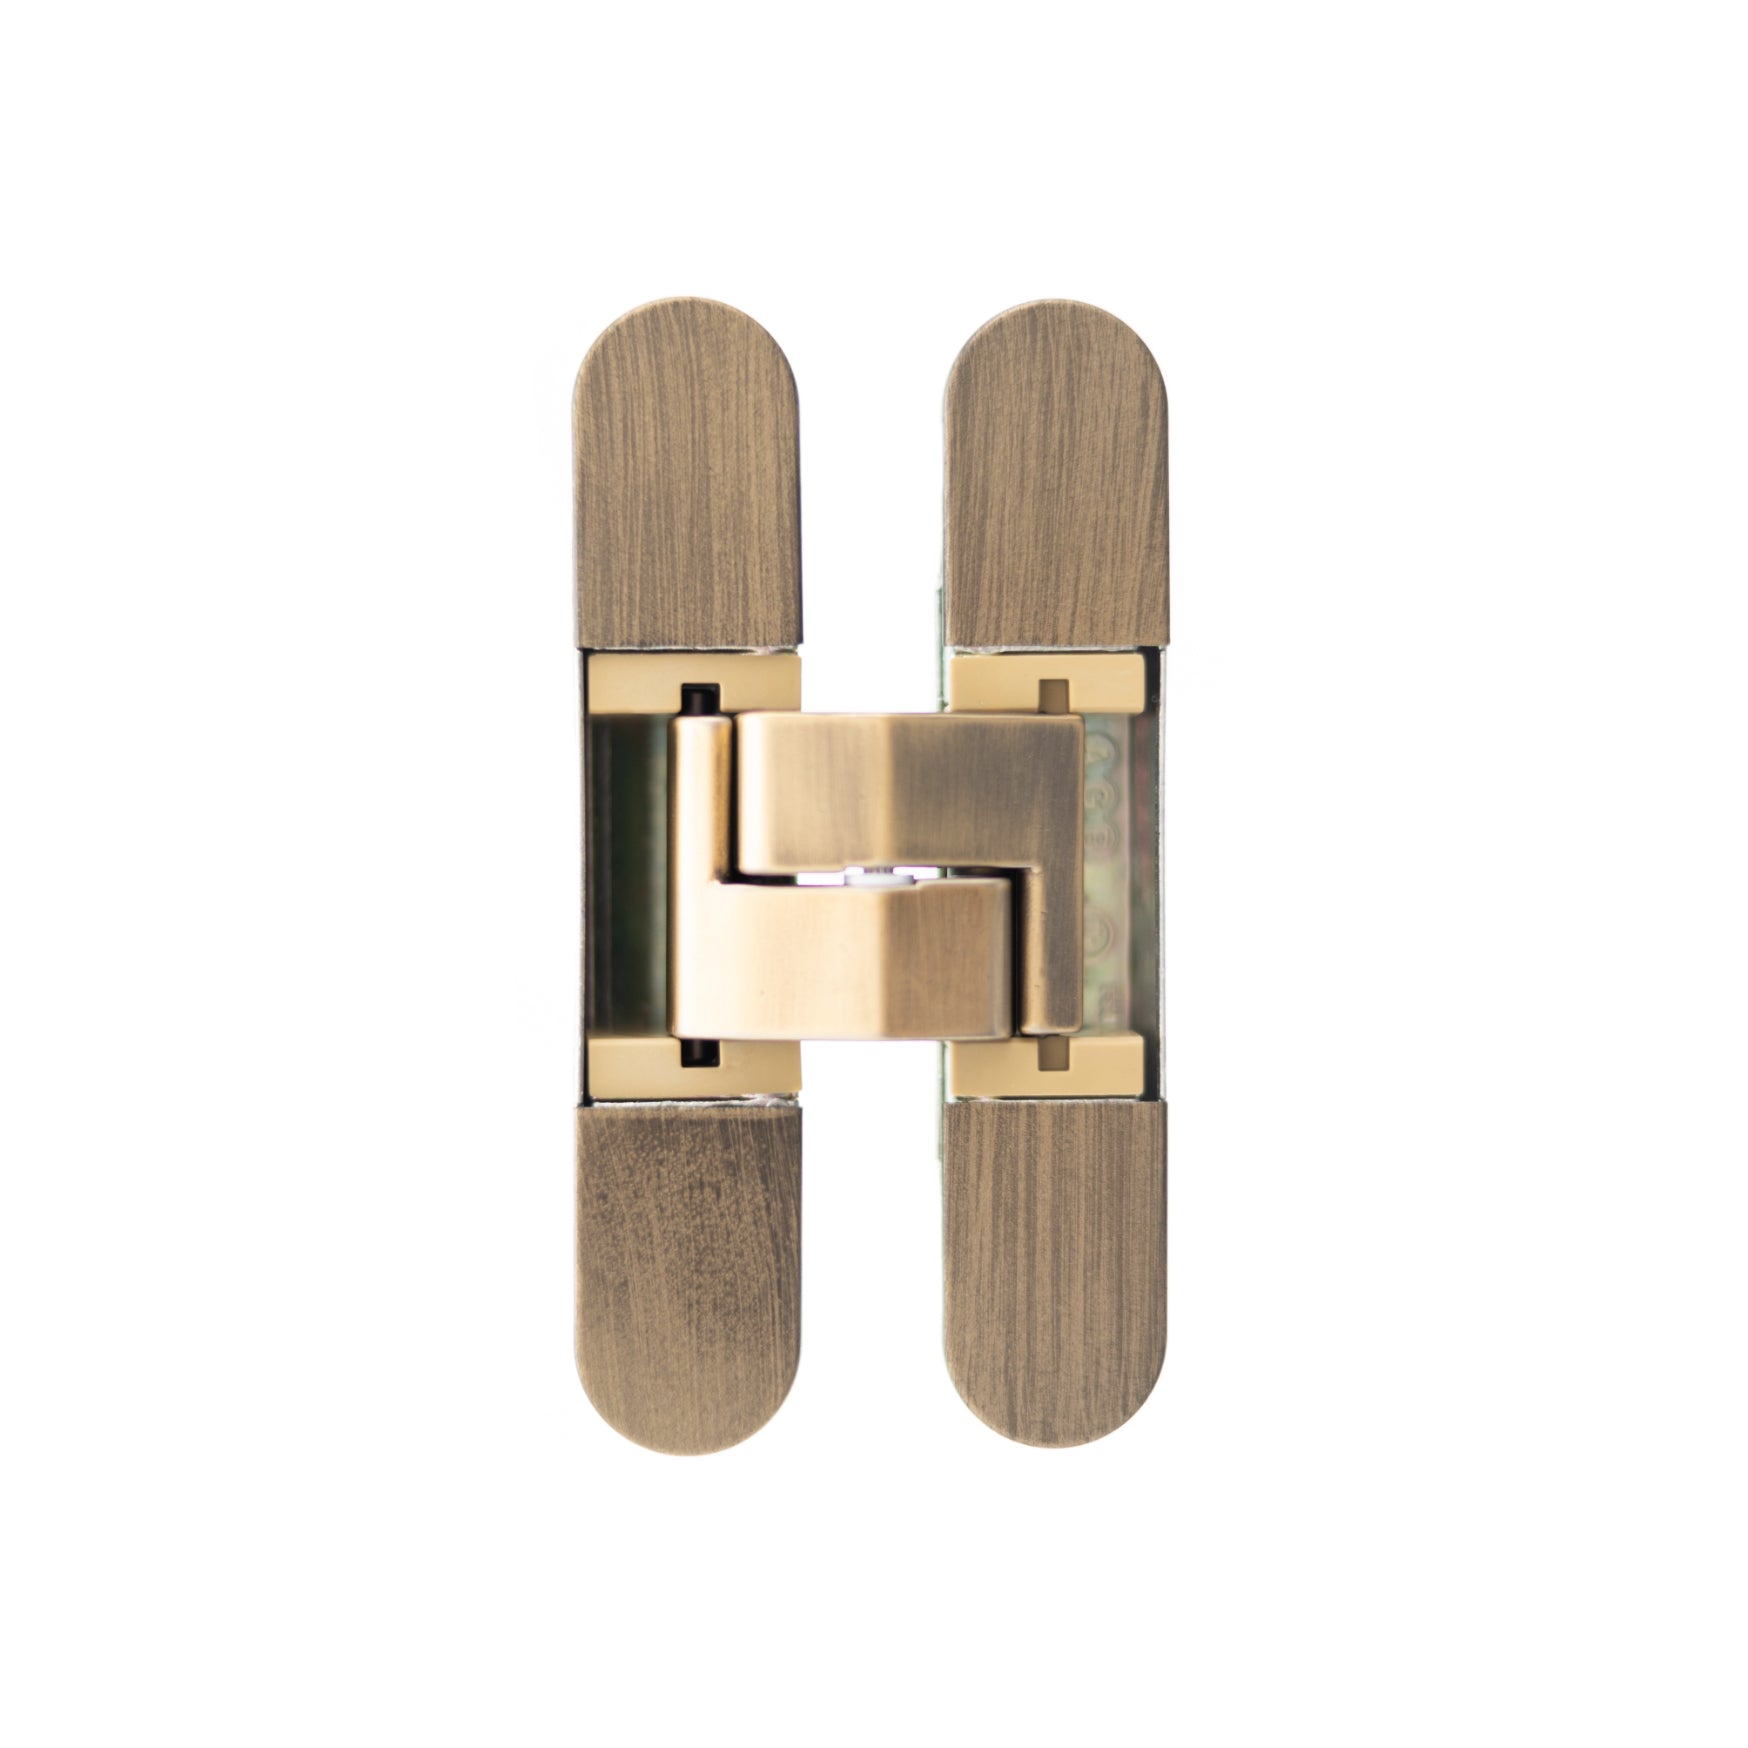 AGB Eclipse Fire Rated Adjustable Concealed Hinge - Matt Antique Brass